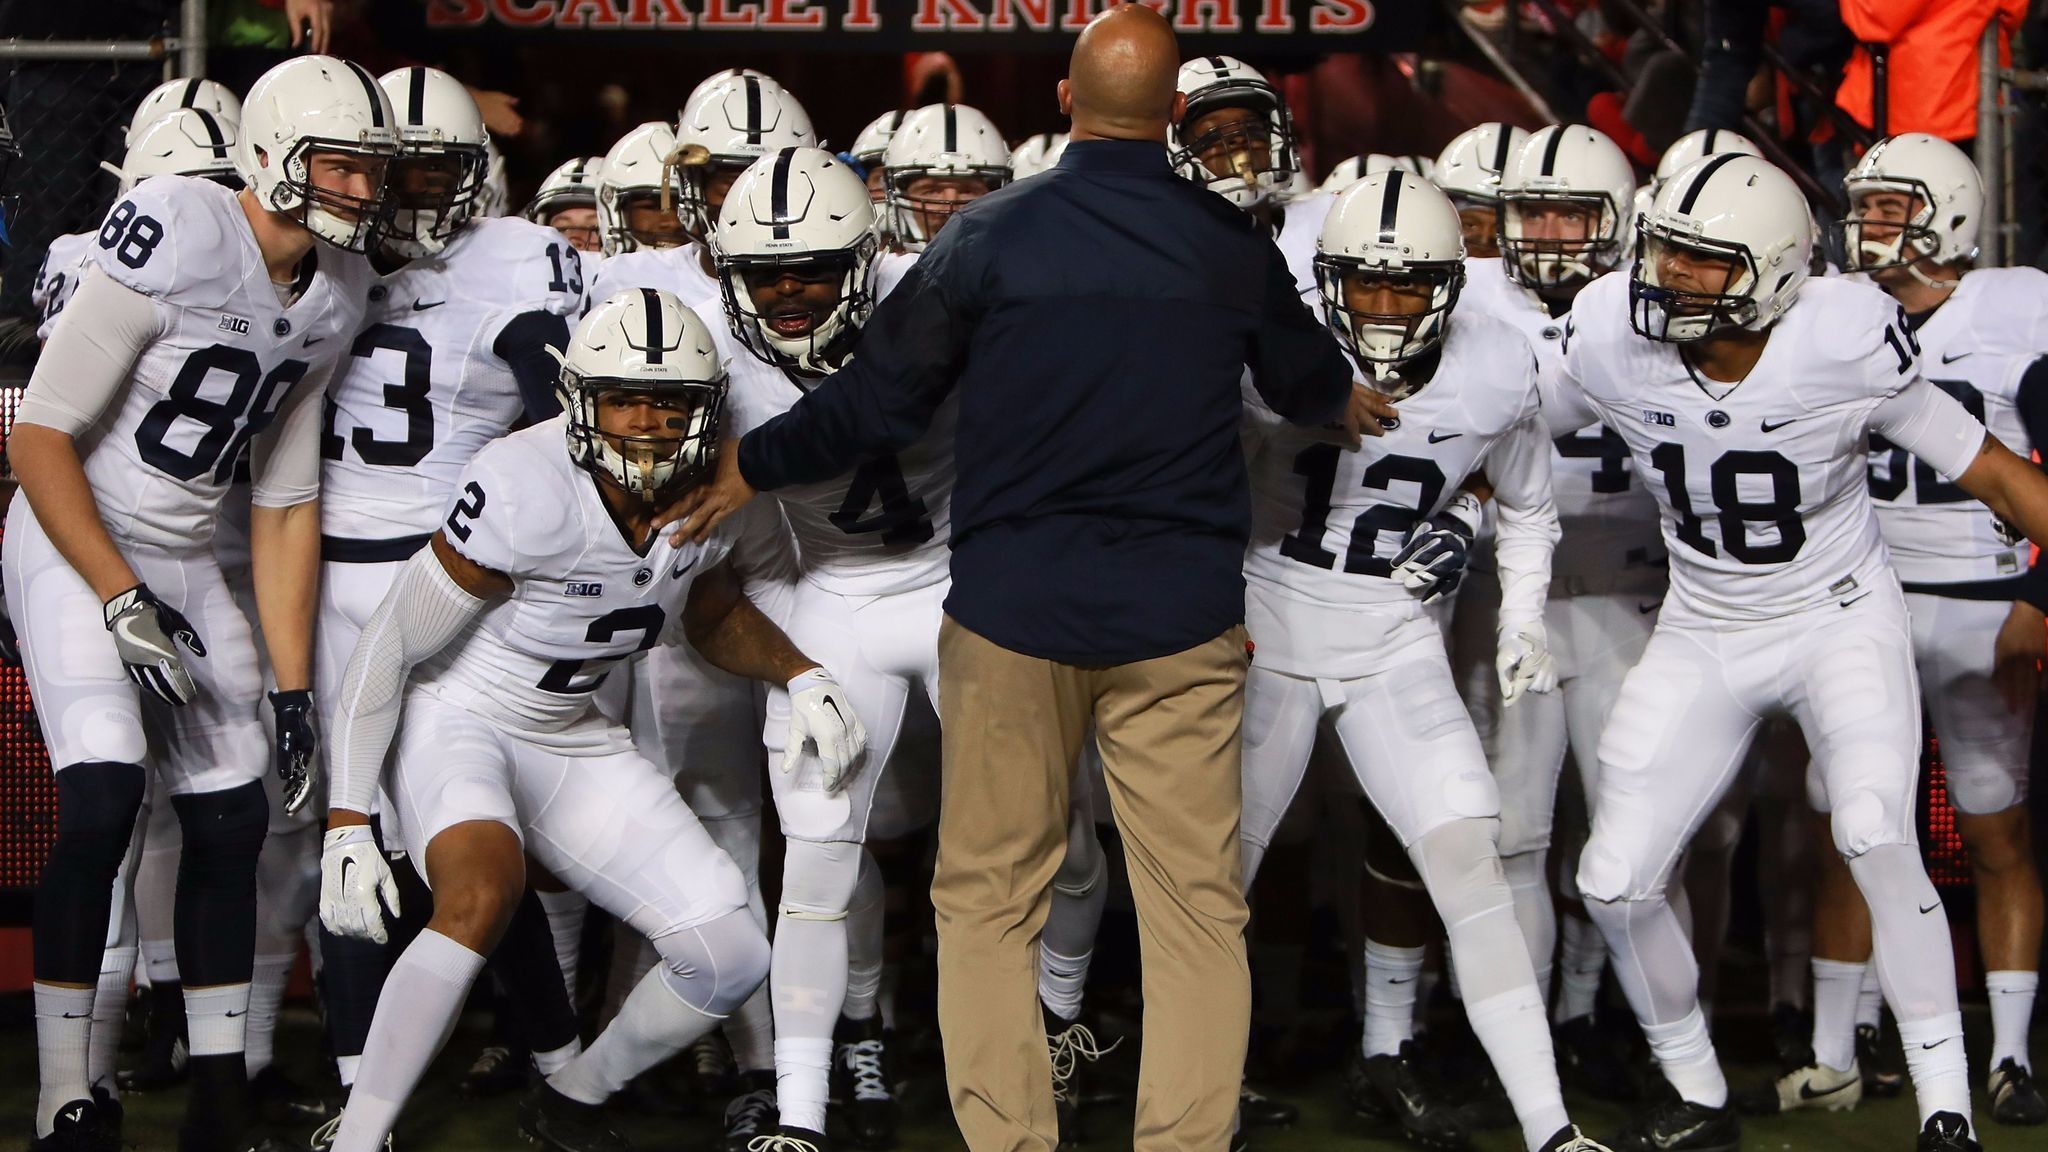 All in: How Penn State coach James Franklin won over the Nittany Lions –  The Morning Call